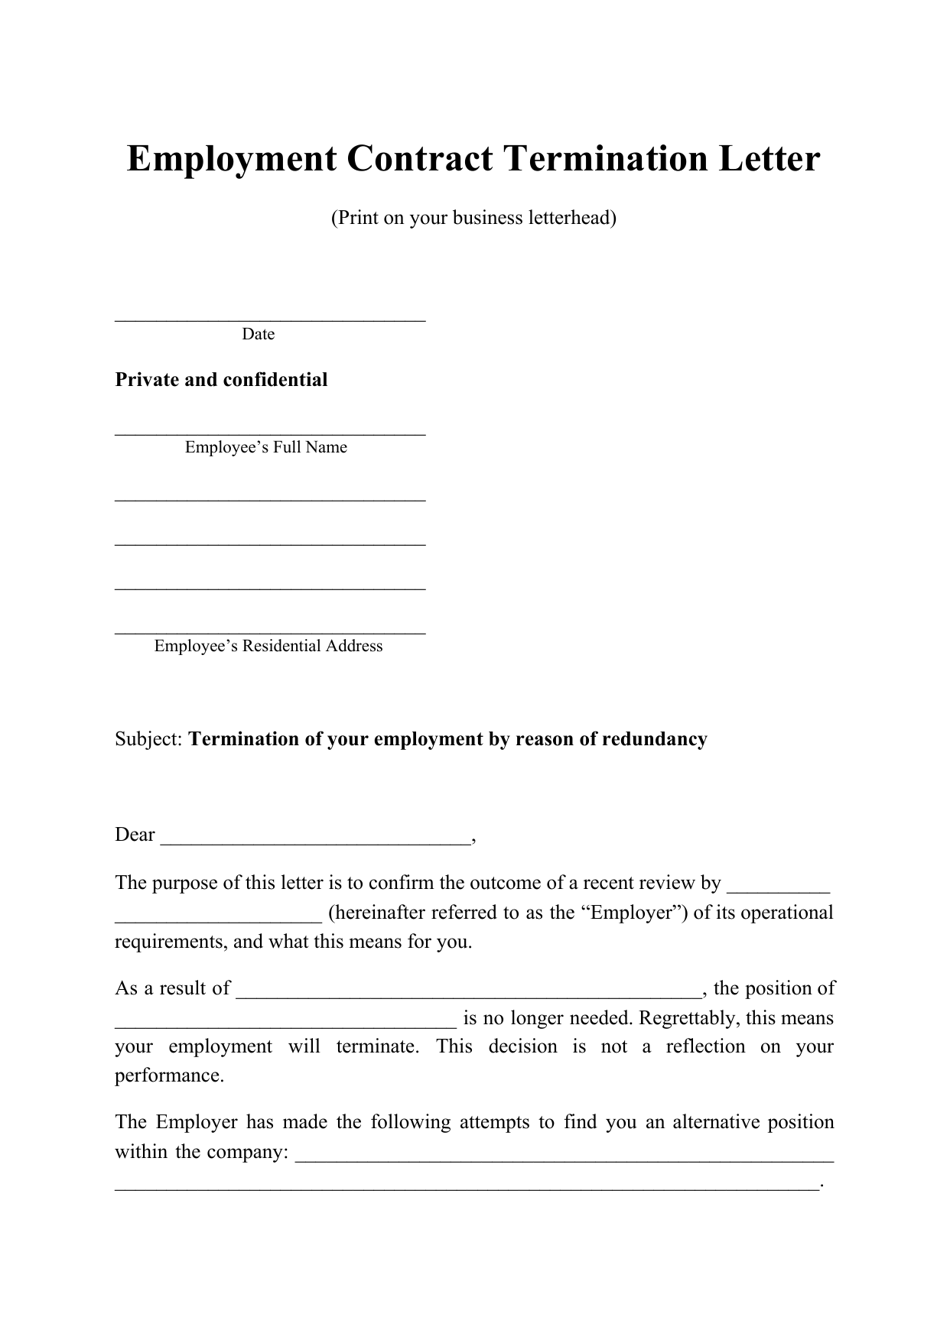 Employment Contract Termination Letter Template, Page 1